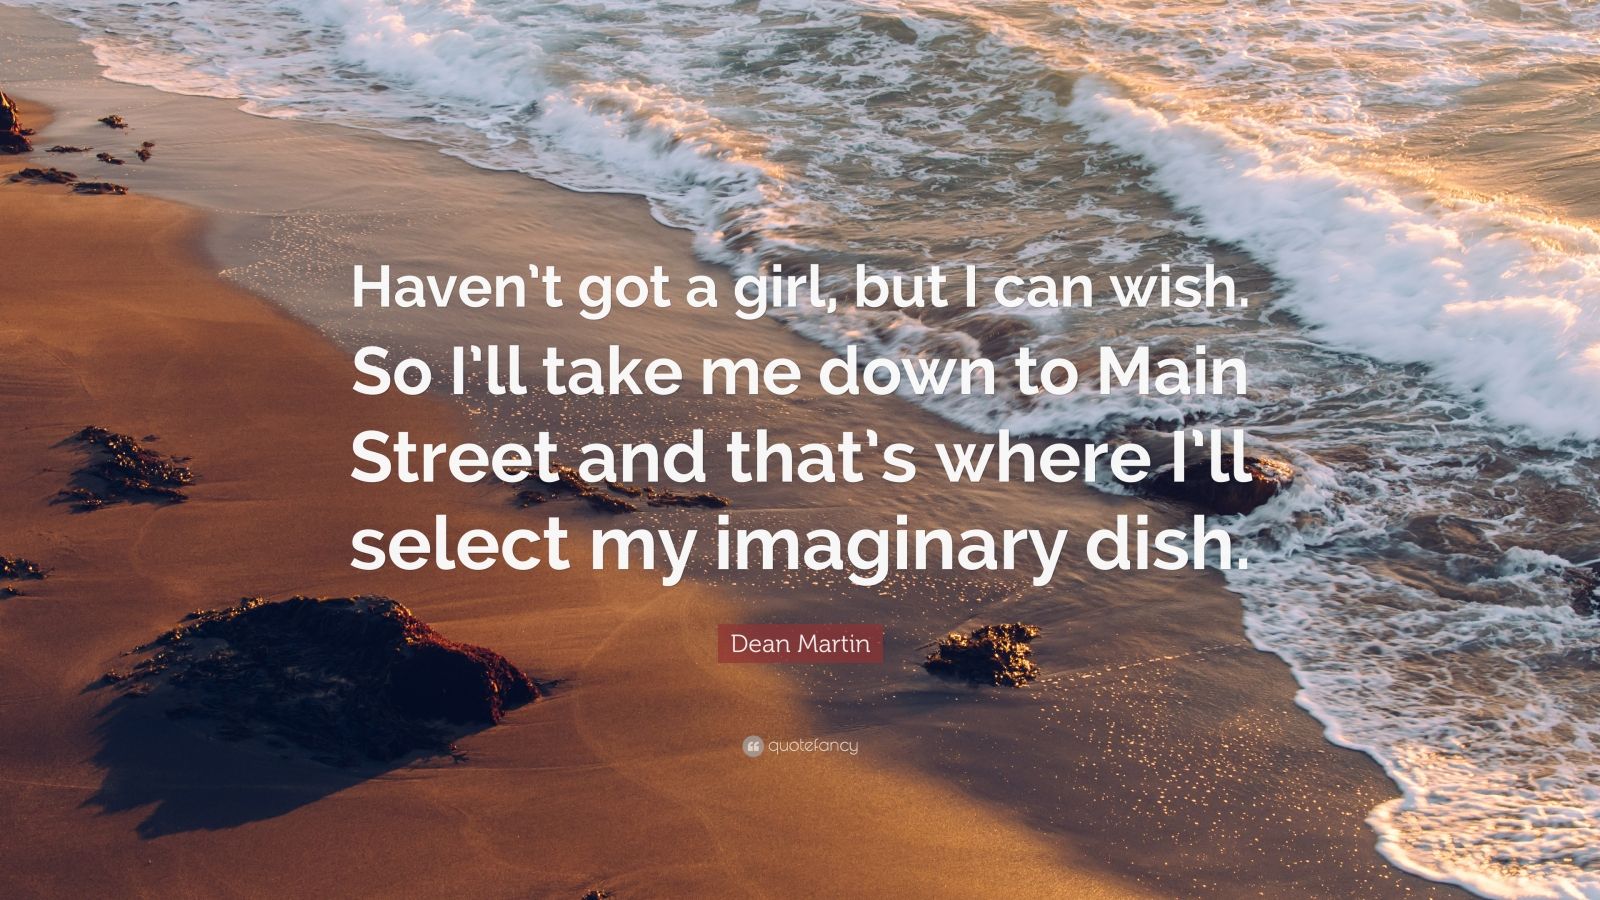 Dean Martin Quote: “Haven’t got a girl, but I can wish. So I’ll take me down to Main Street and that’s where I’ll select my imaginary dish.”